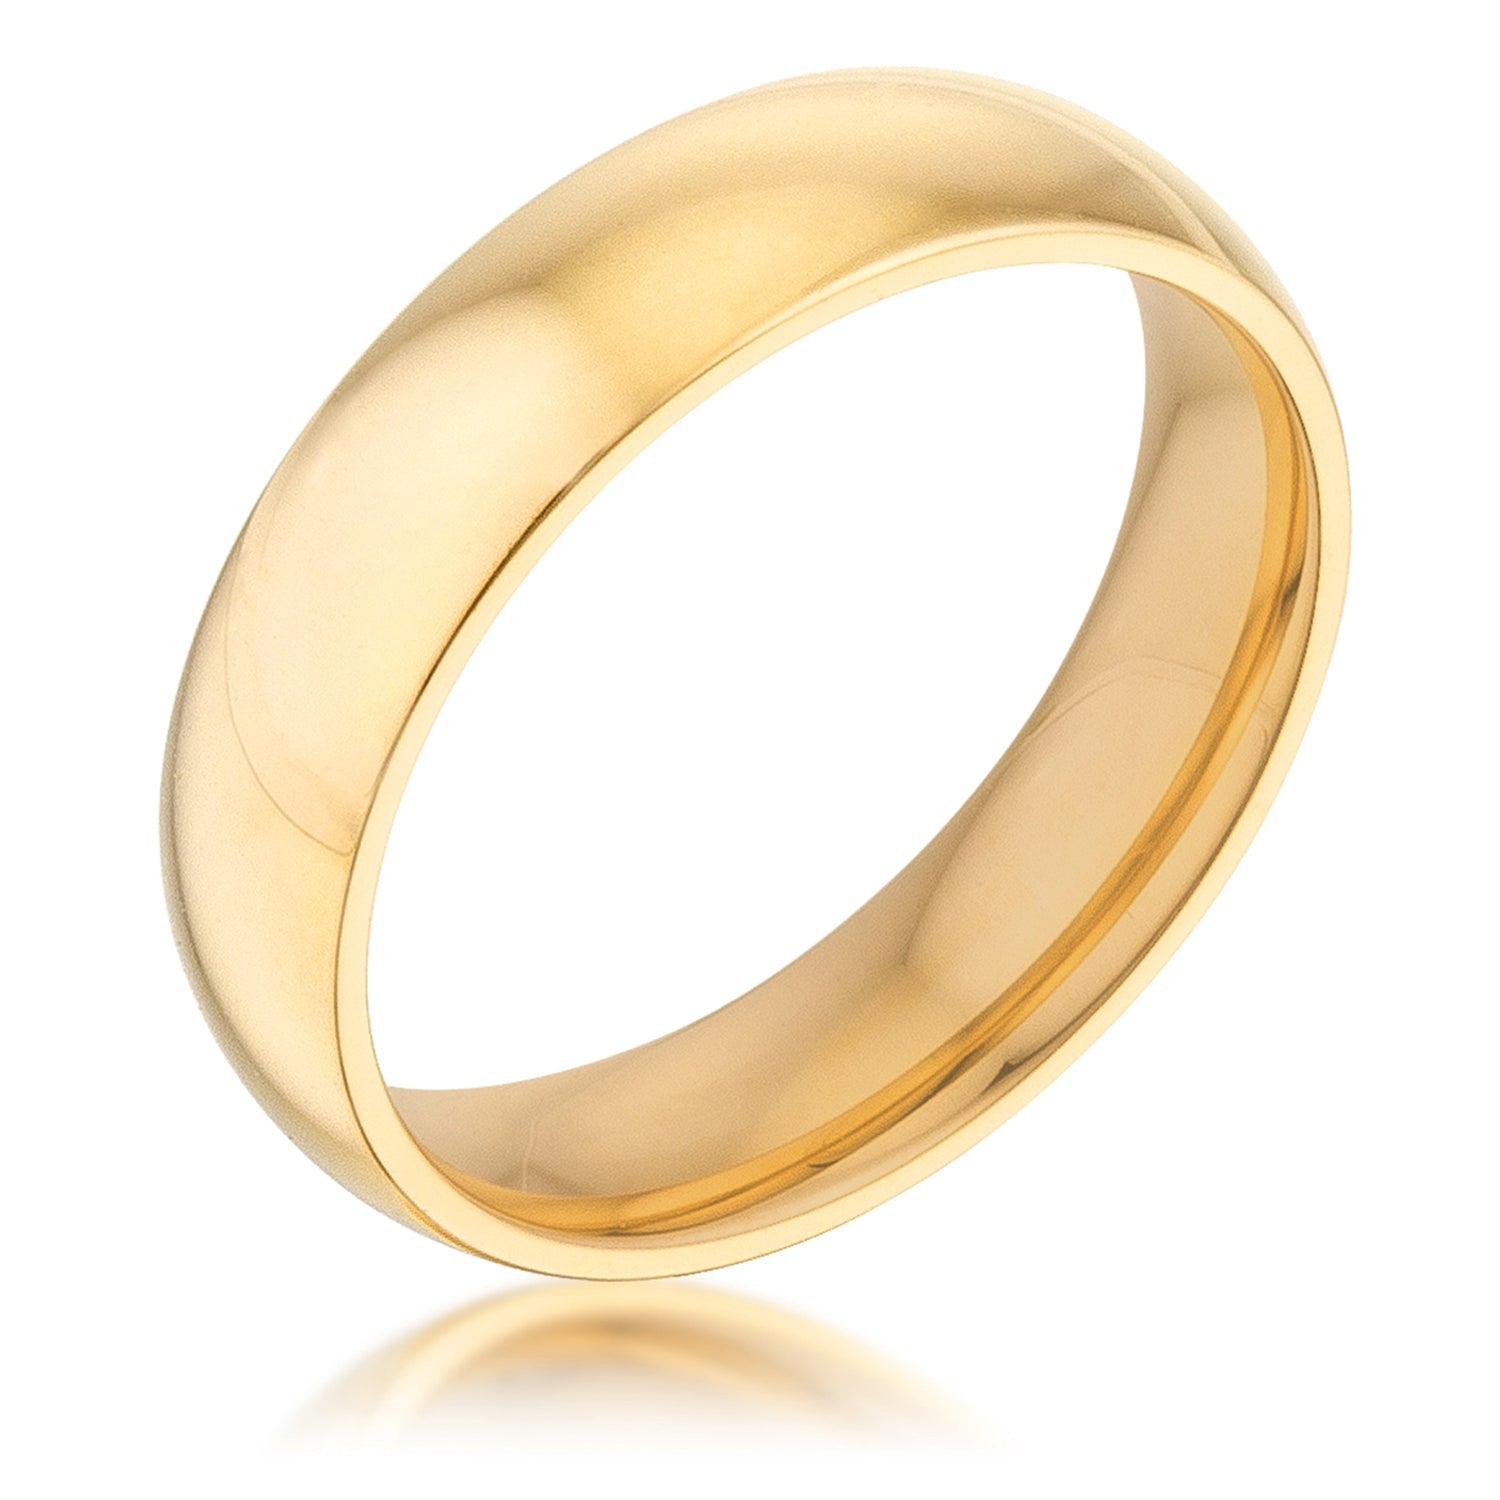 5 mm IPG Gold Stainless Steel Band - LinkagejewelrydesignLinkagejewelrydesign